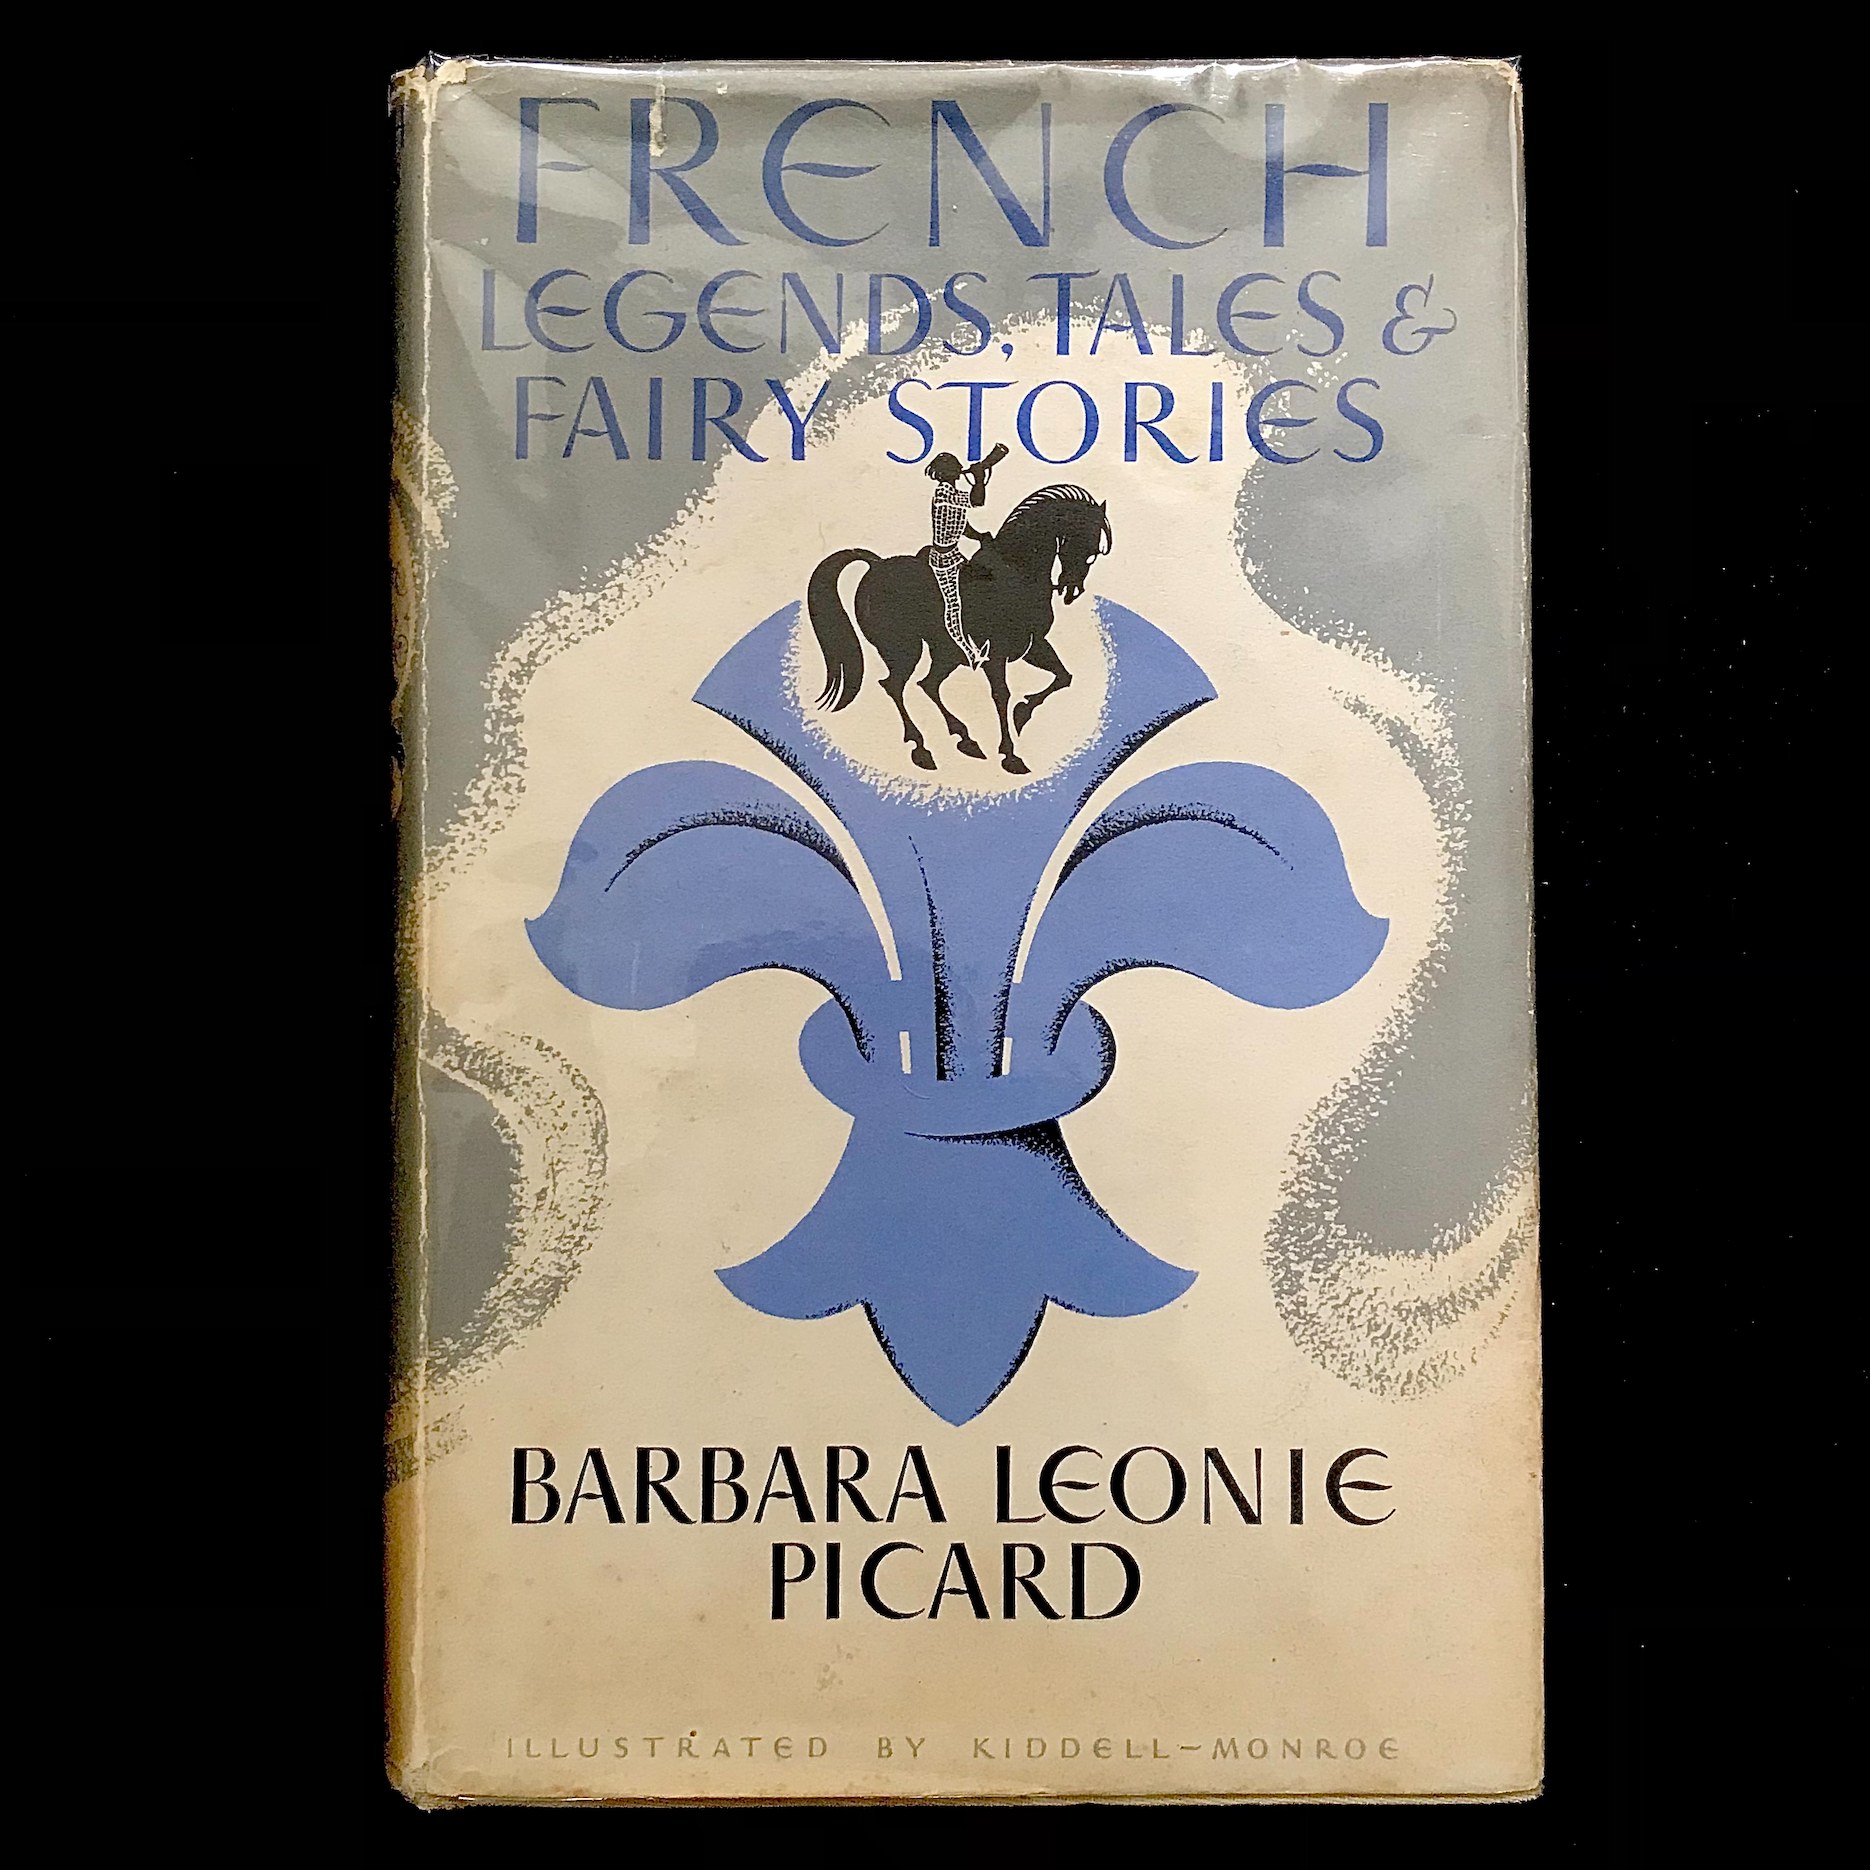 French Legends, Tales, & Fairy Stories by Barbara Leonie Picard